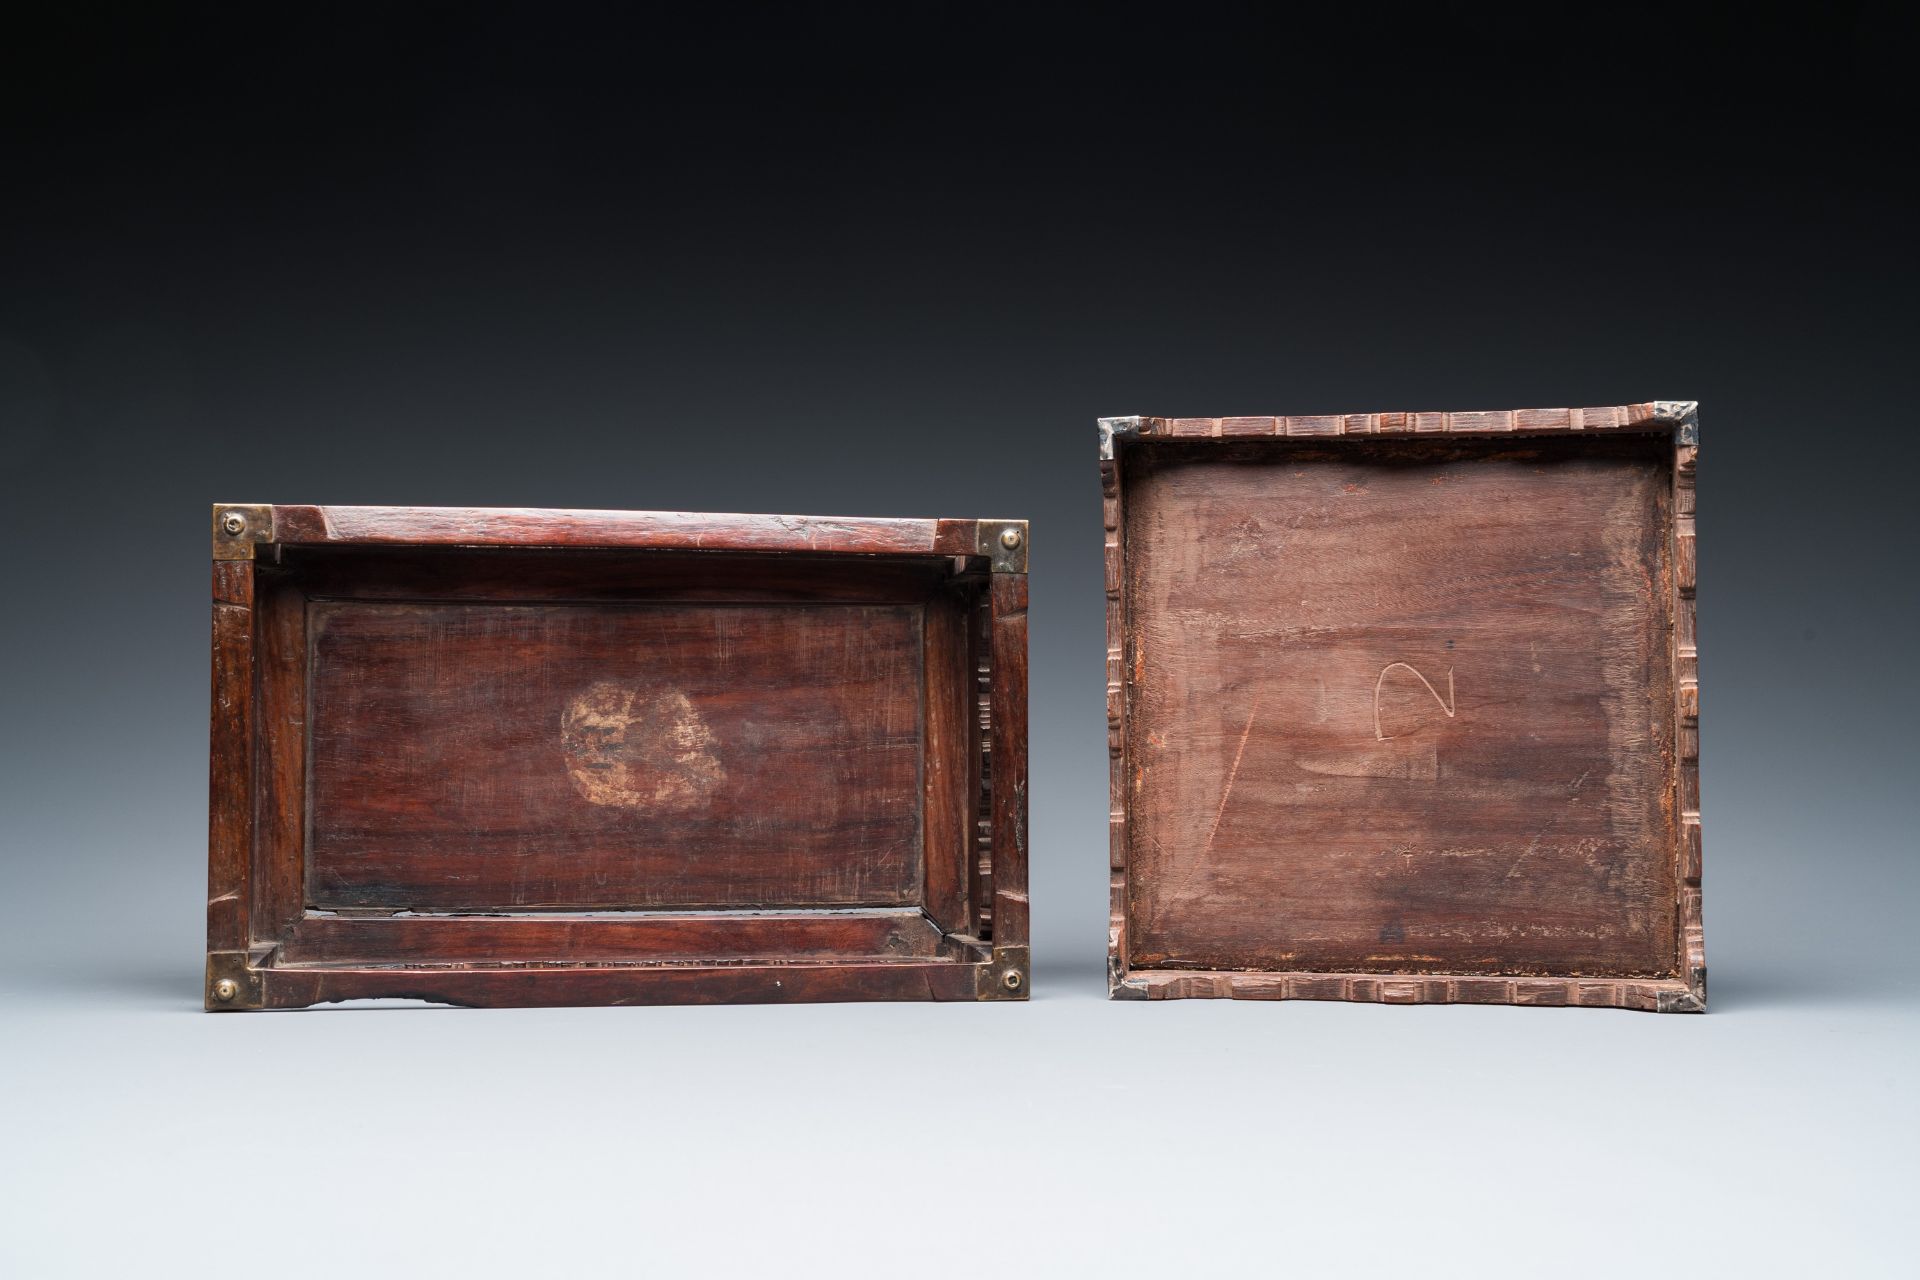 Two mother-of-pearl-inlaid wooden trays, two opium trays and an oval frame, China and/or Vietnam, 19 - Bild 9 aus 9